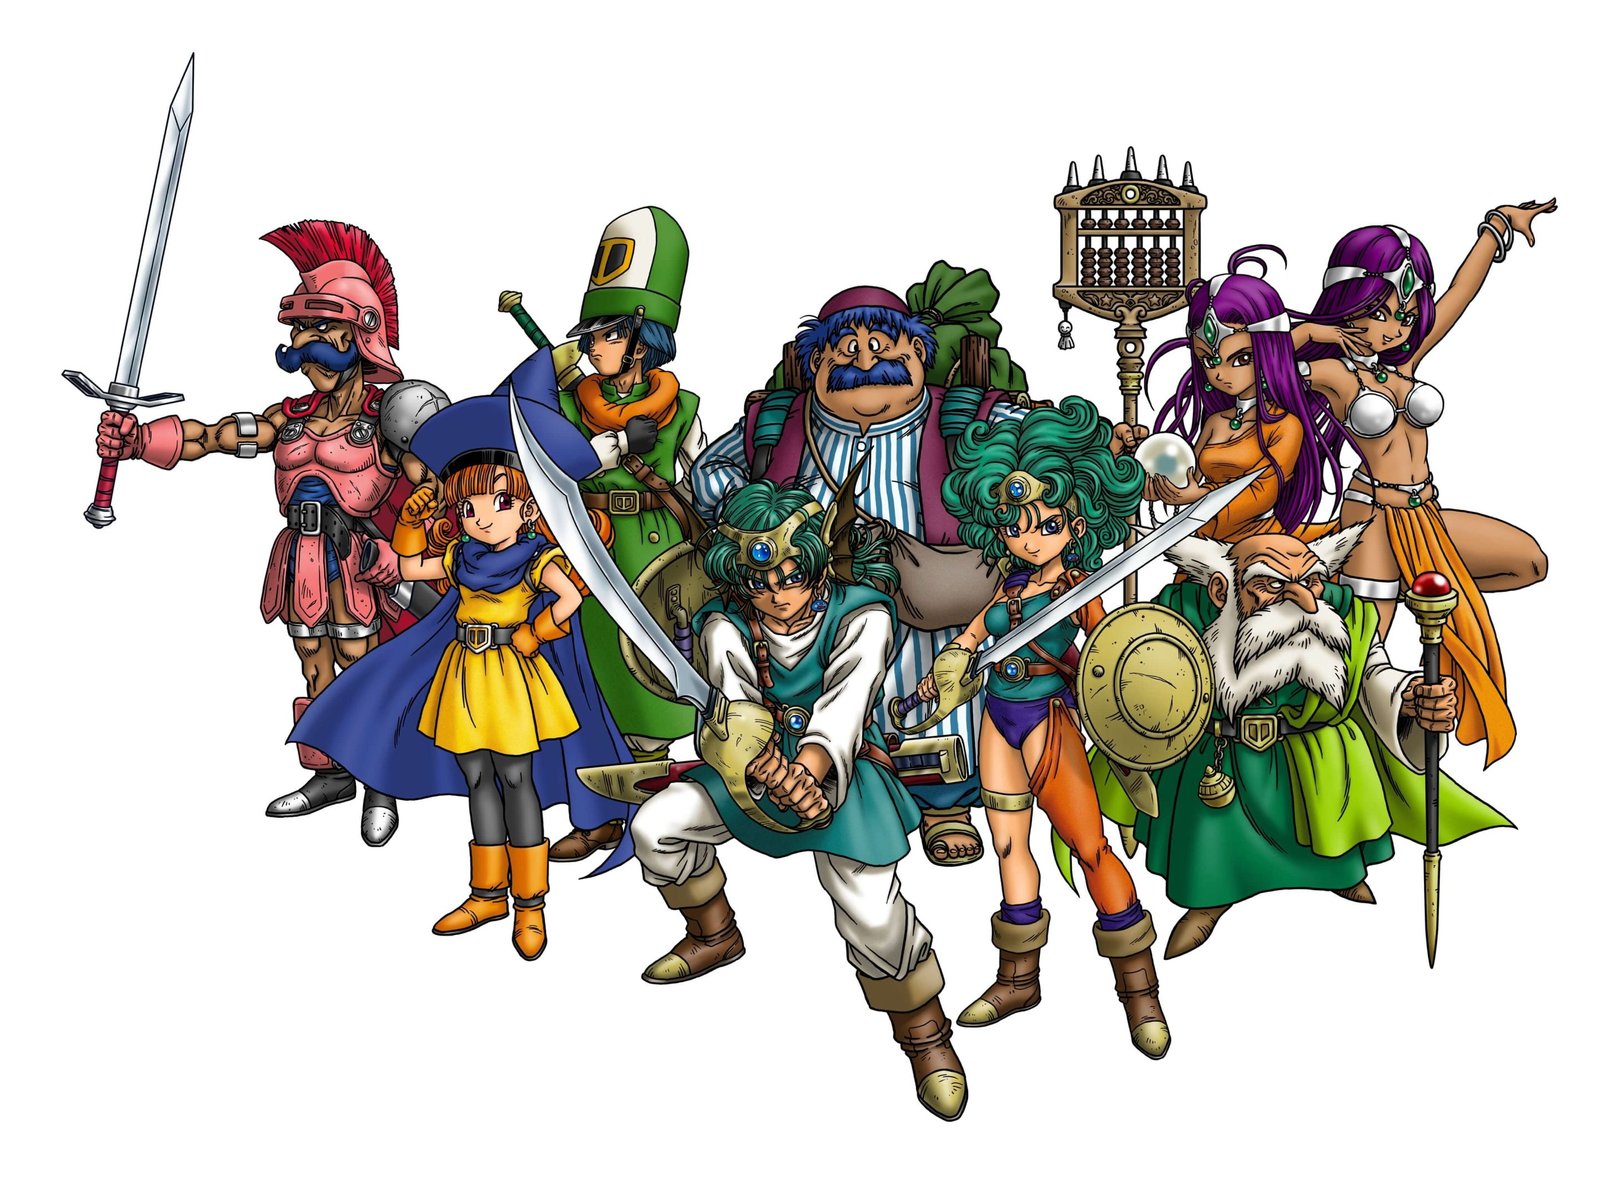 Dragon Quest IV (Ch.1): Ragnar McRyan and the Case of the Missing Children